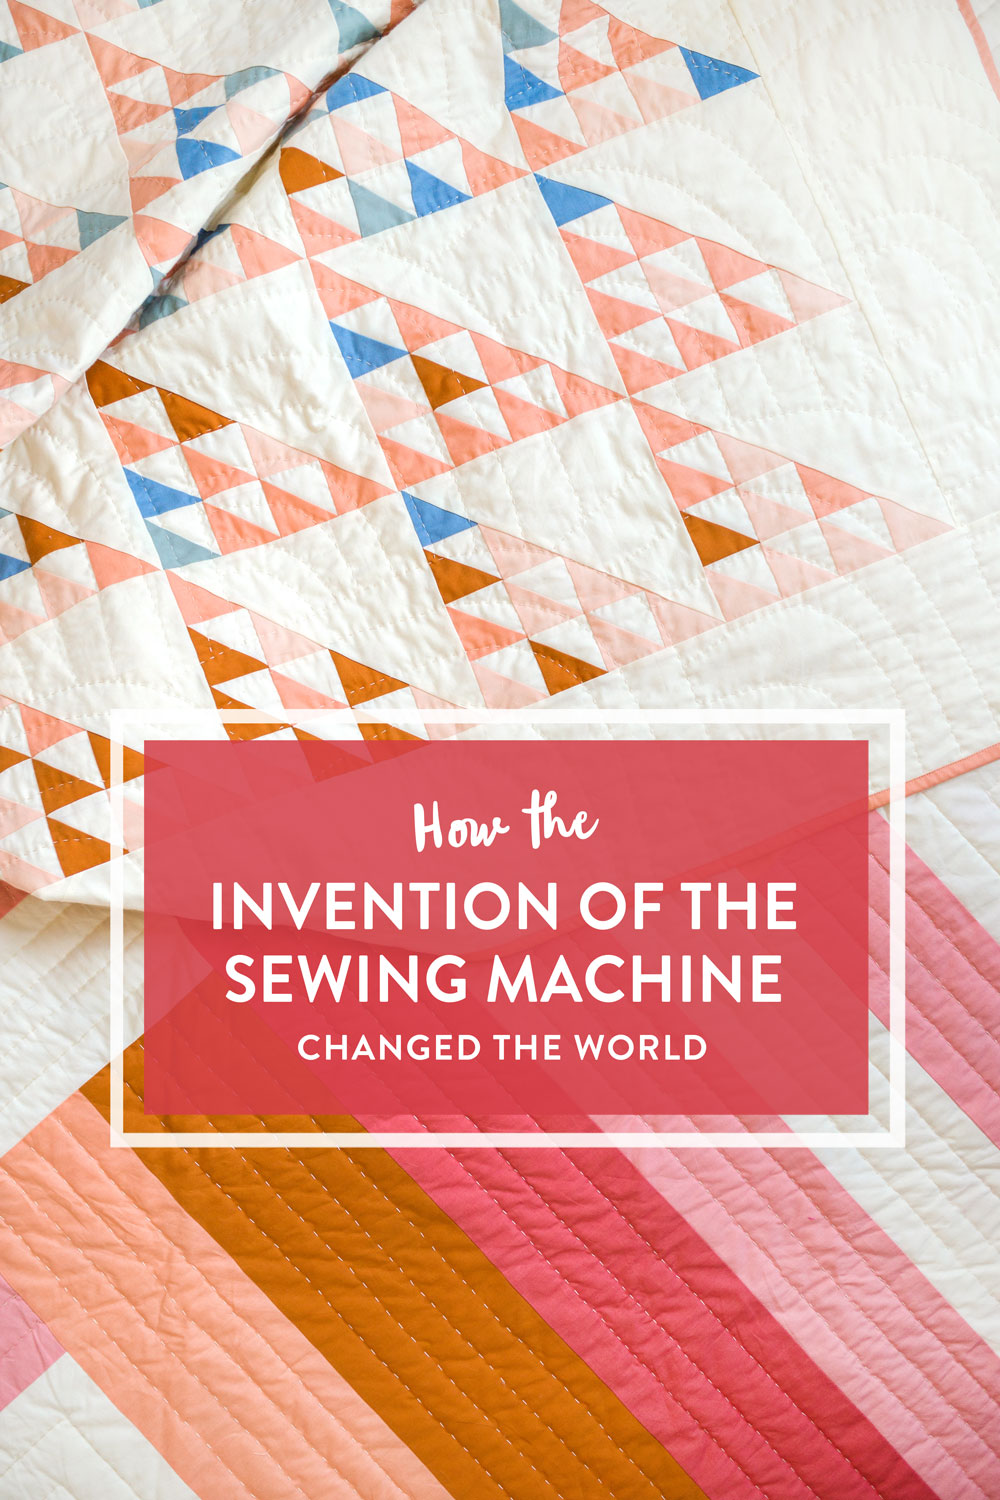 How the invention of the sewing machine changed quilting, and even the world, forever – a quick and entertaining history! suzyquilts.com #quilting